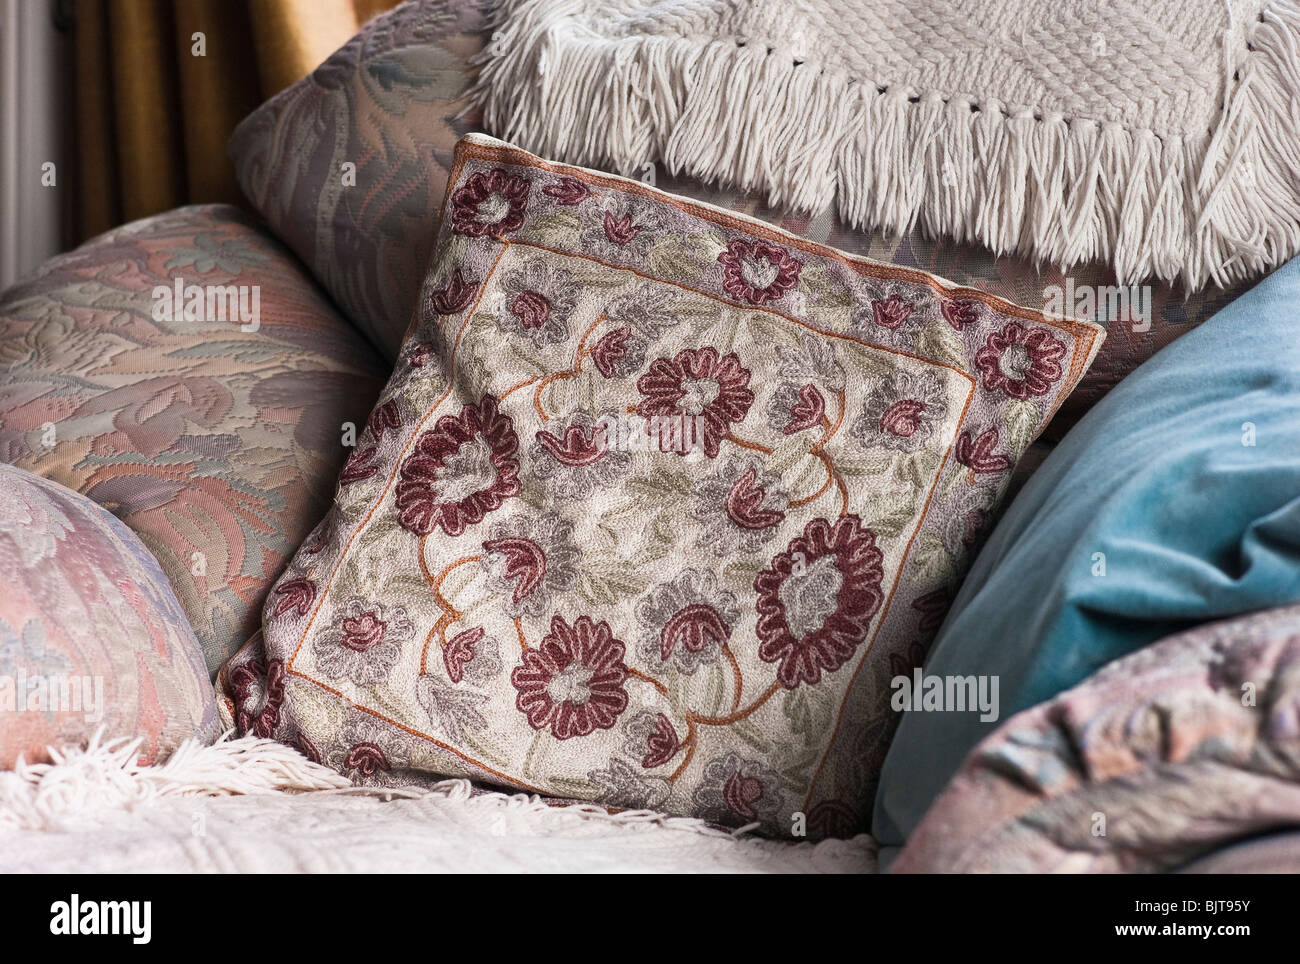 Cushions and soft furnishing on easy chair Stock Photo